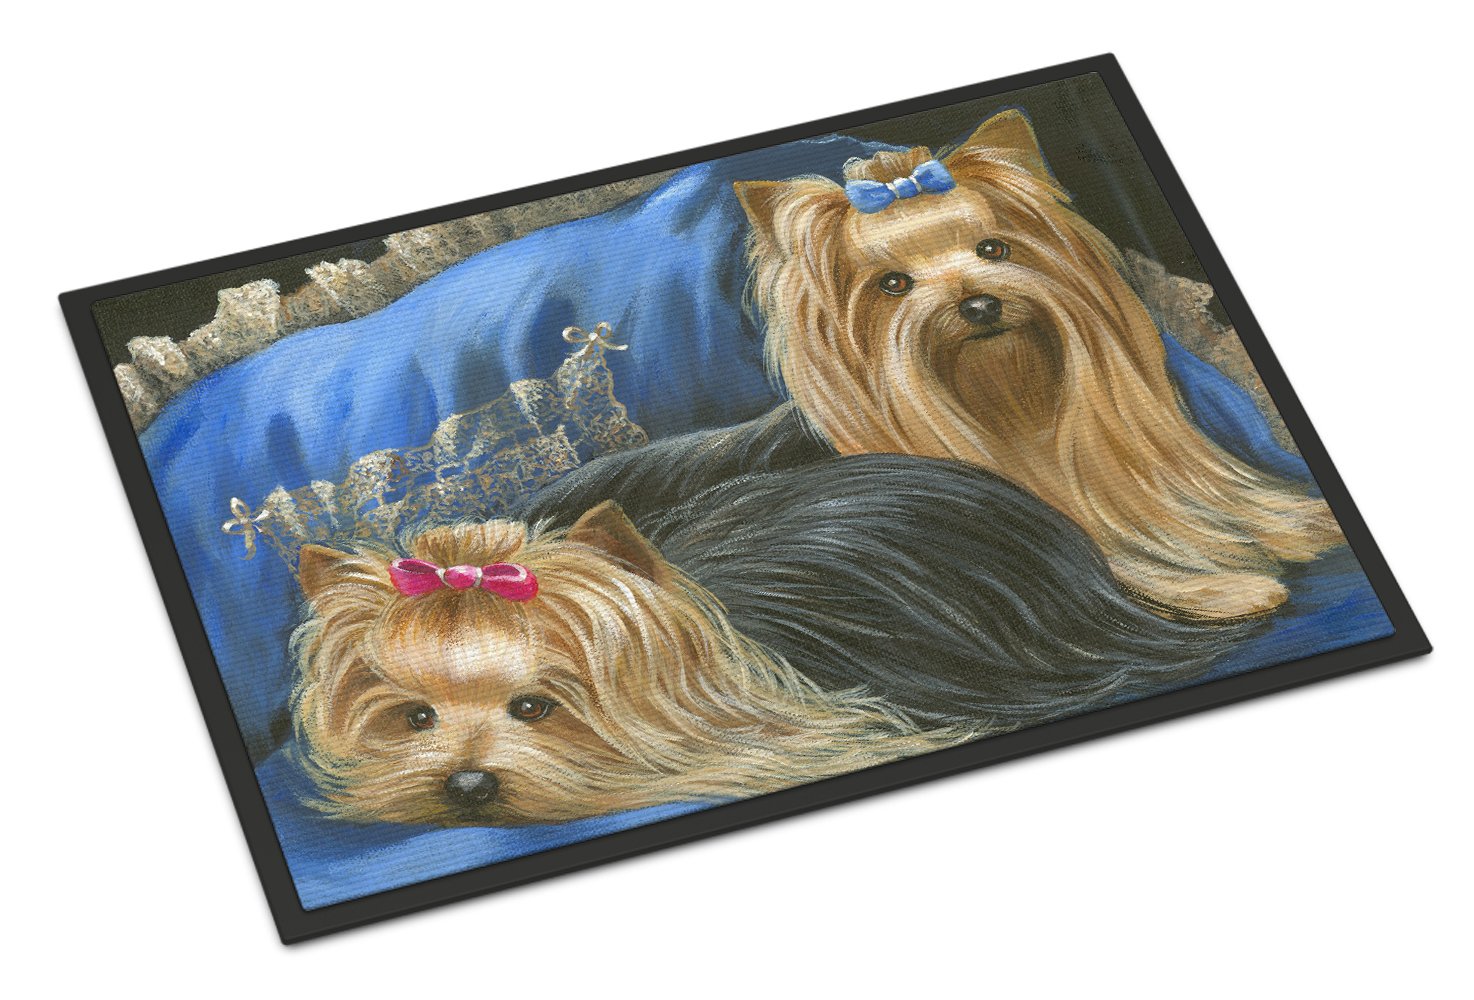 Yorkshire Terrier Yorkie Satin and Lace Indoor or Outdoor Mat 24x36 PPP3293JMAT by Caroline's Treasures